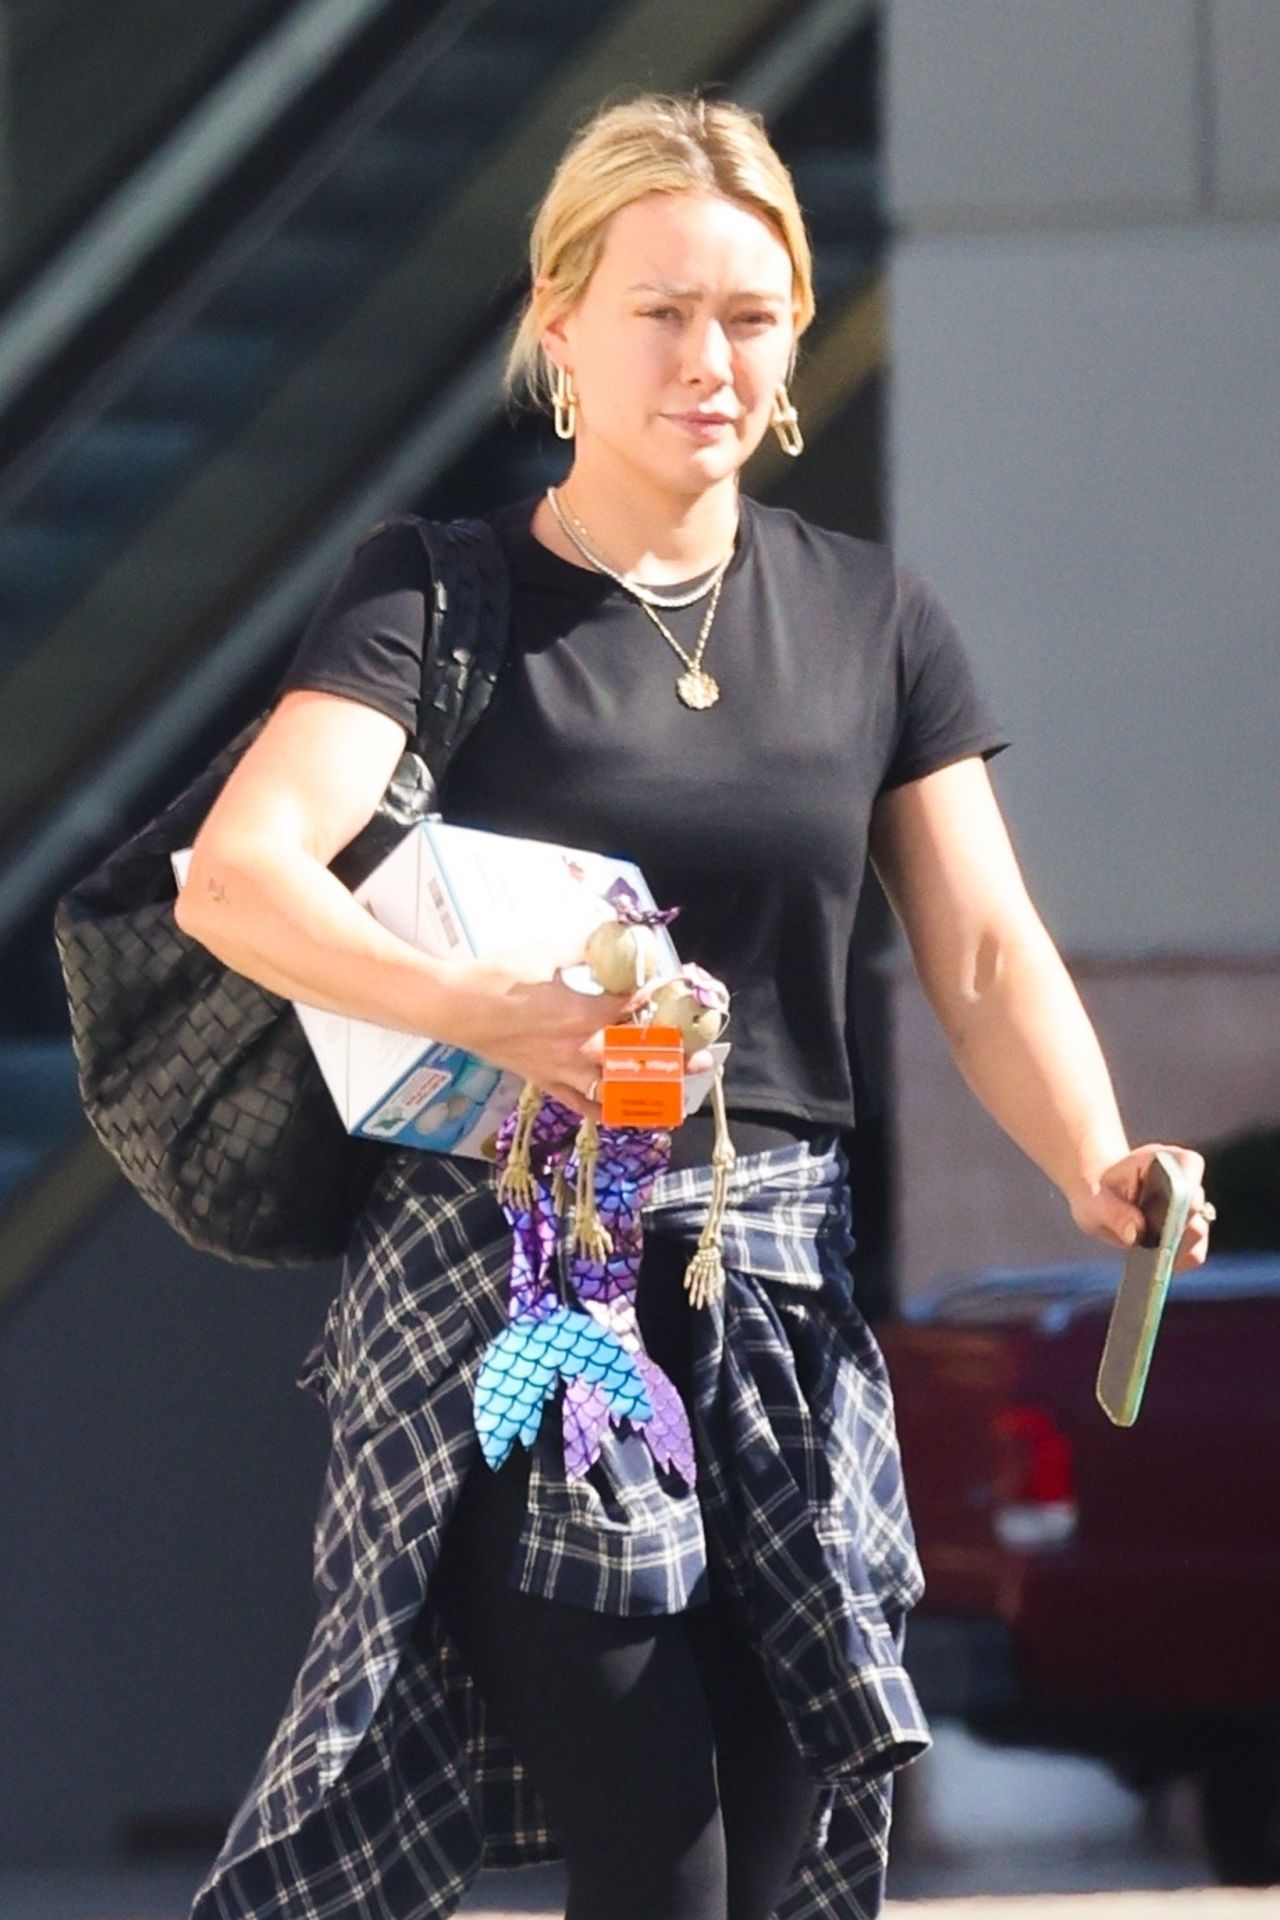 Hilary Duff Out in Studio City Ca October 9, 2012 – Star Style